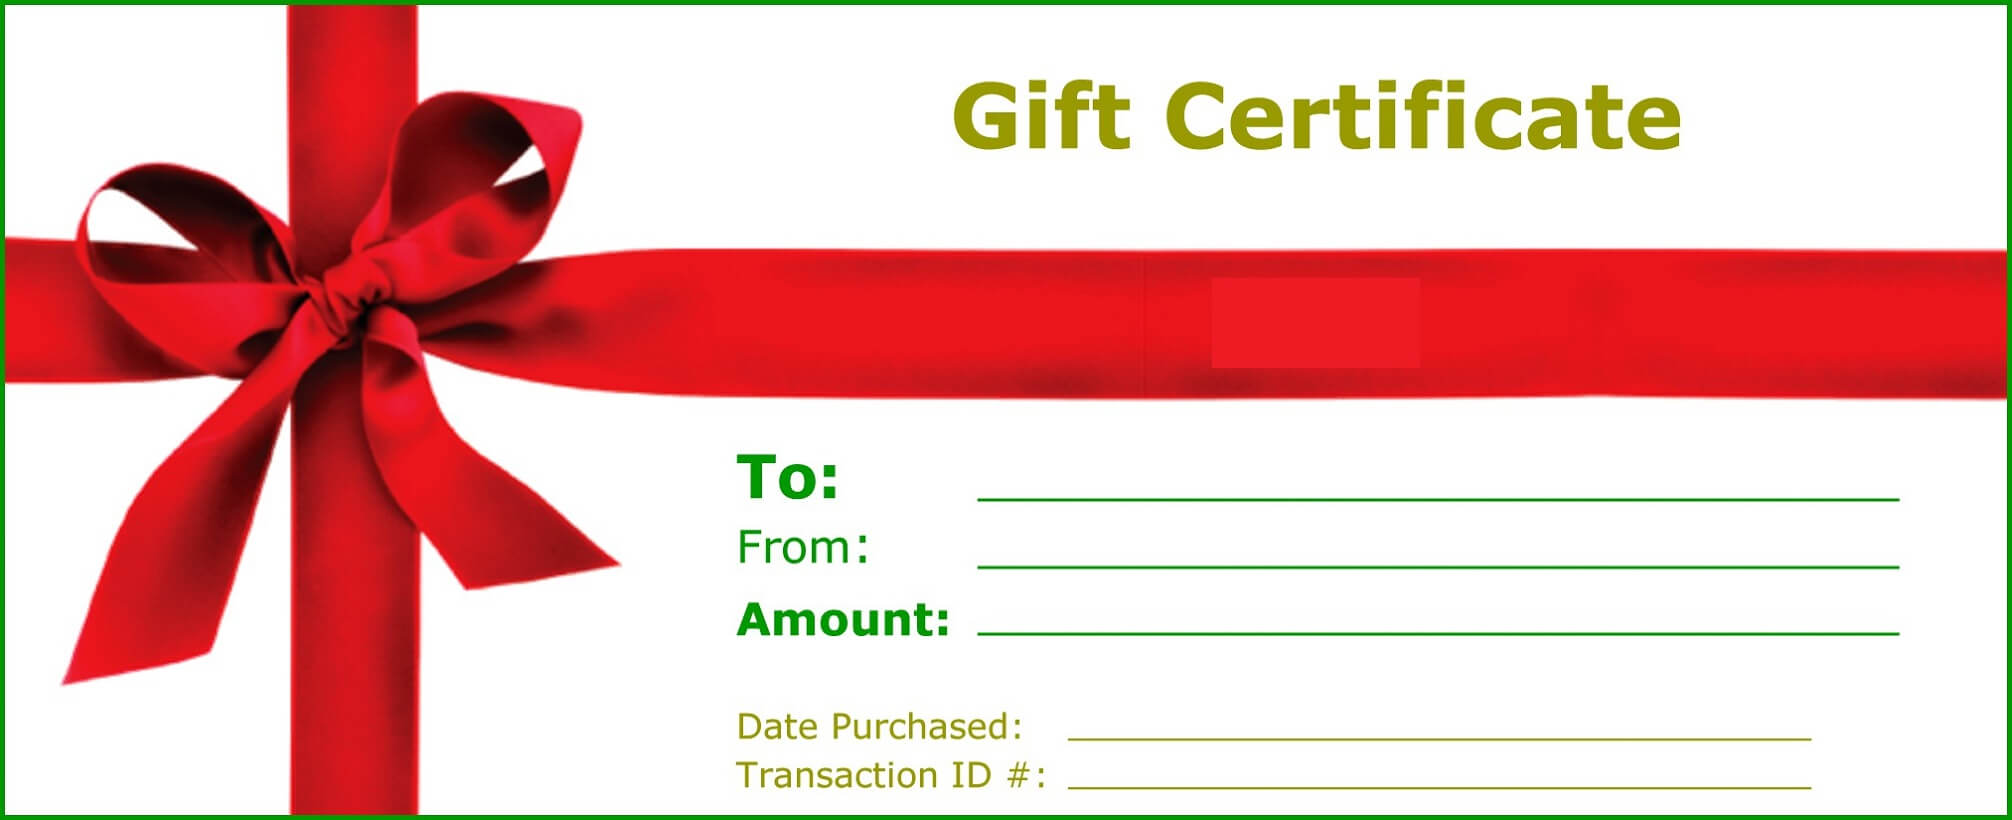 Gift Certificate Templates To Print | Activity Shelter In Kids Gift Certificate Template